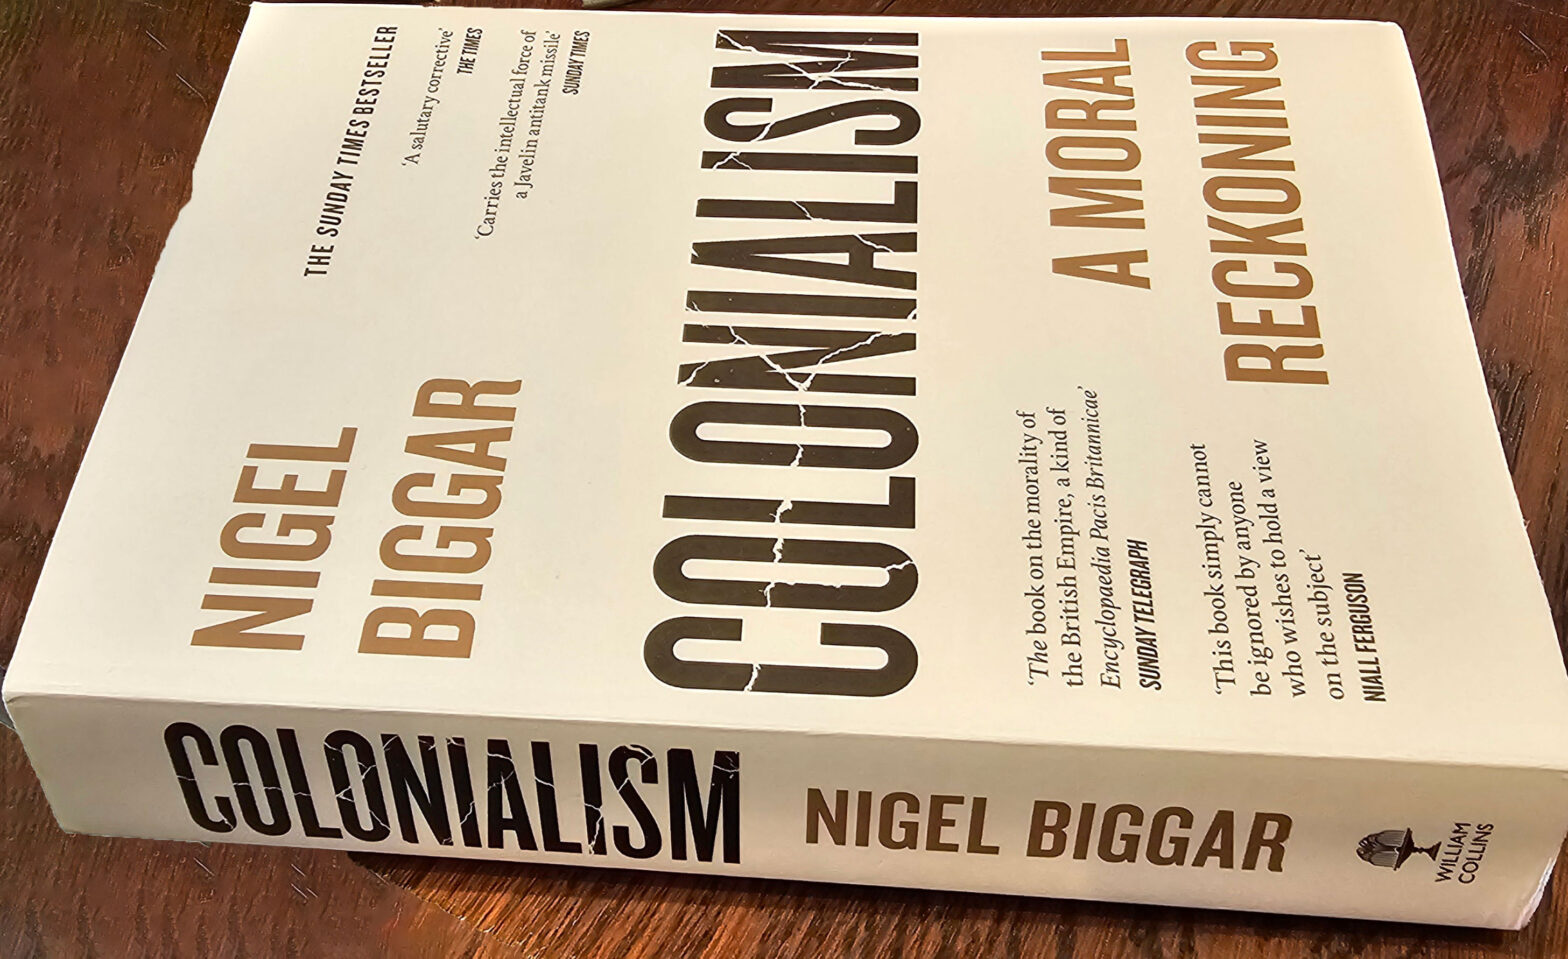 Picture of paperback edition of Colonialism a book by Nigel Biggar of Oxford University